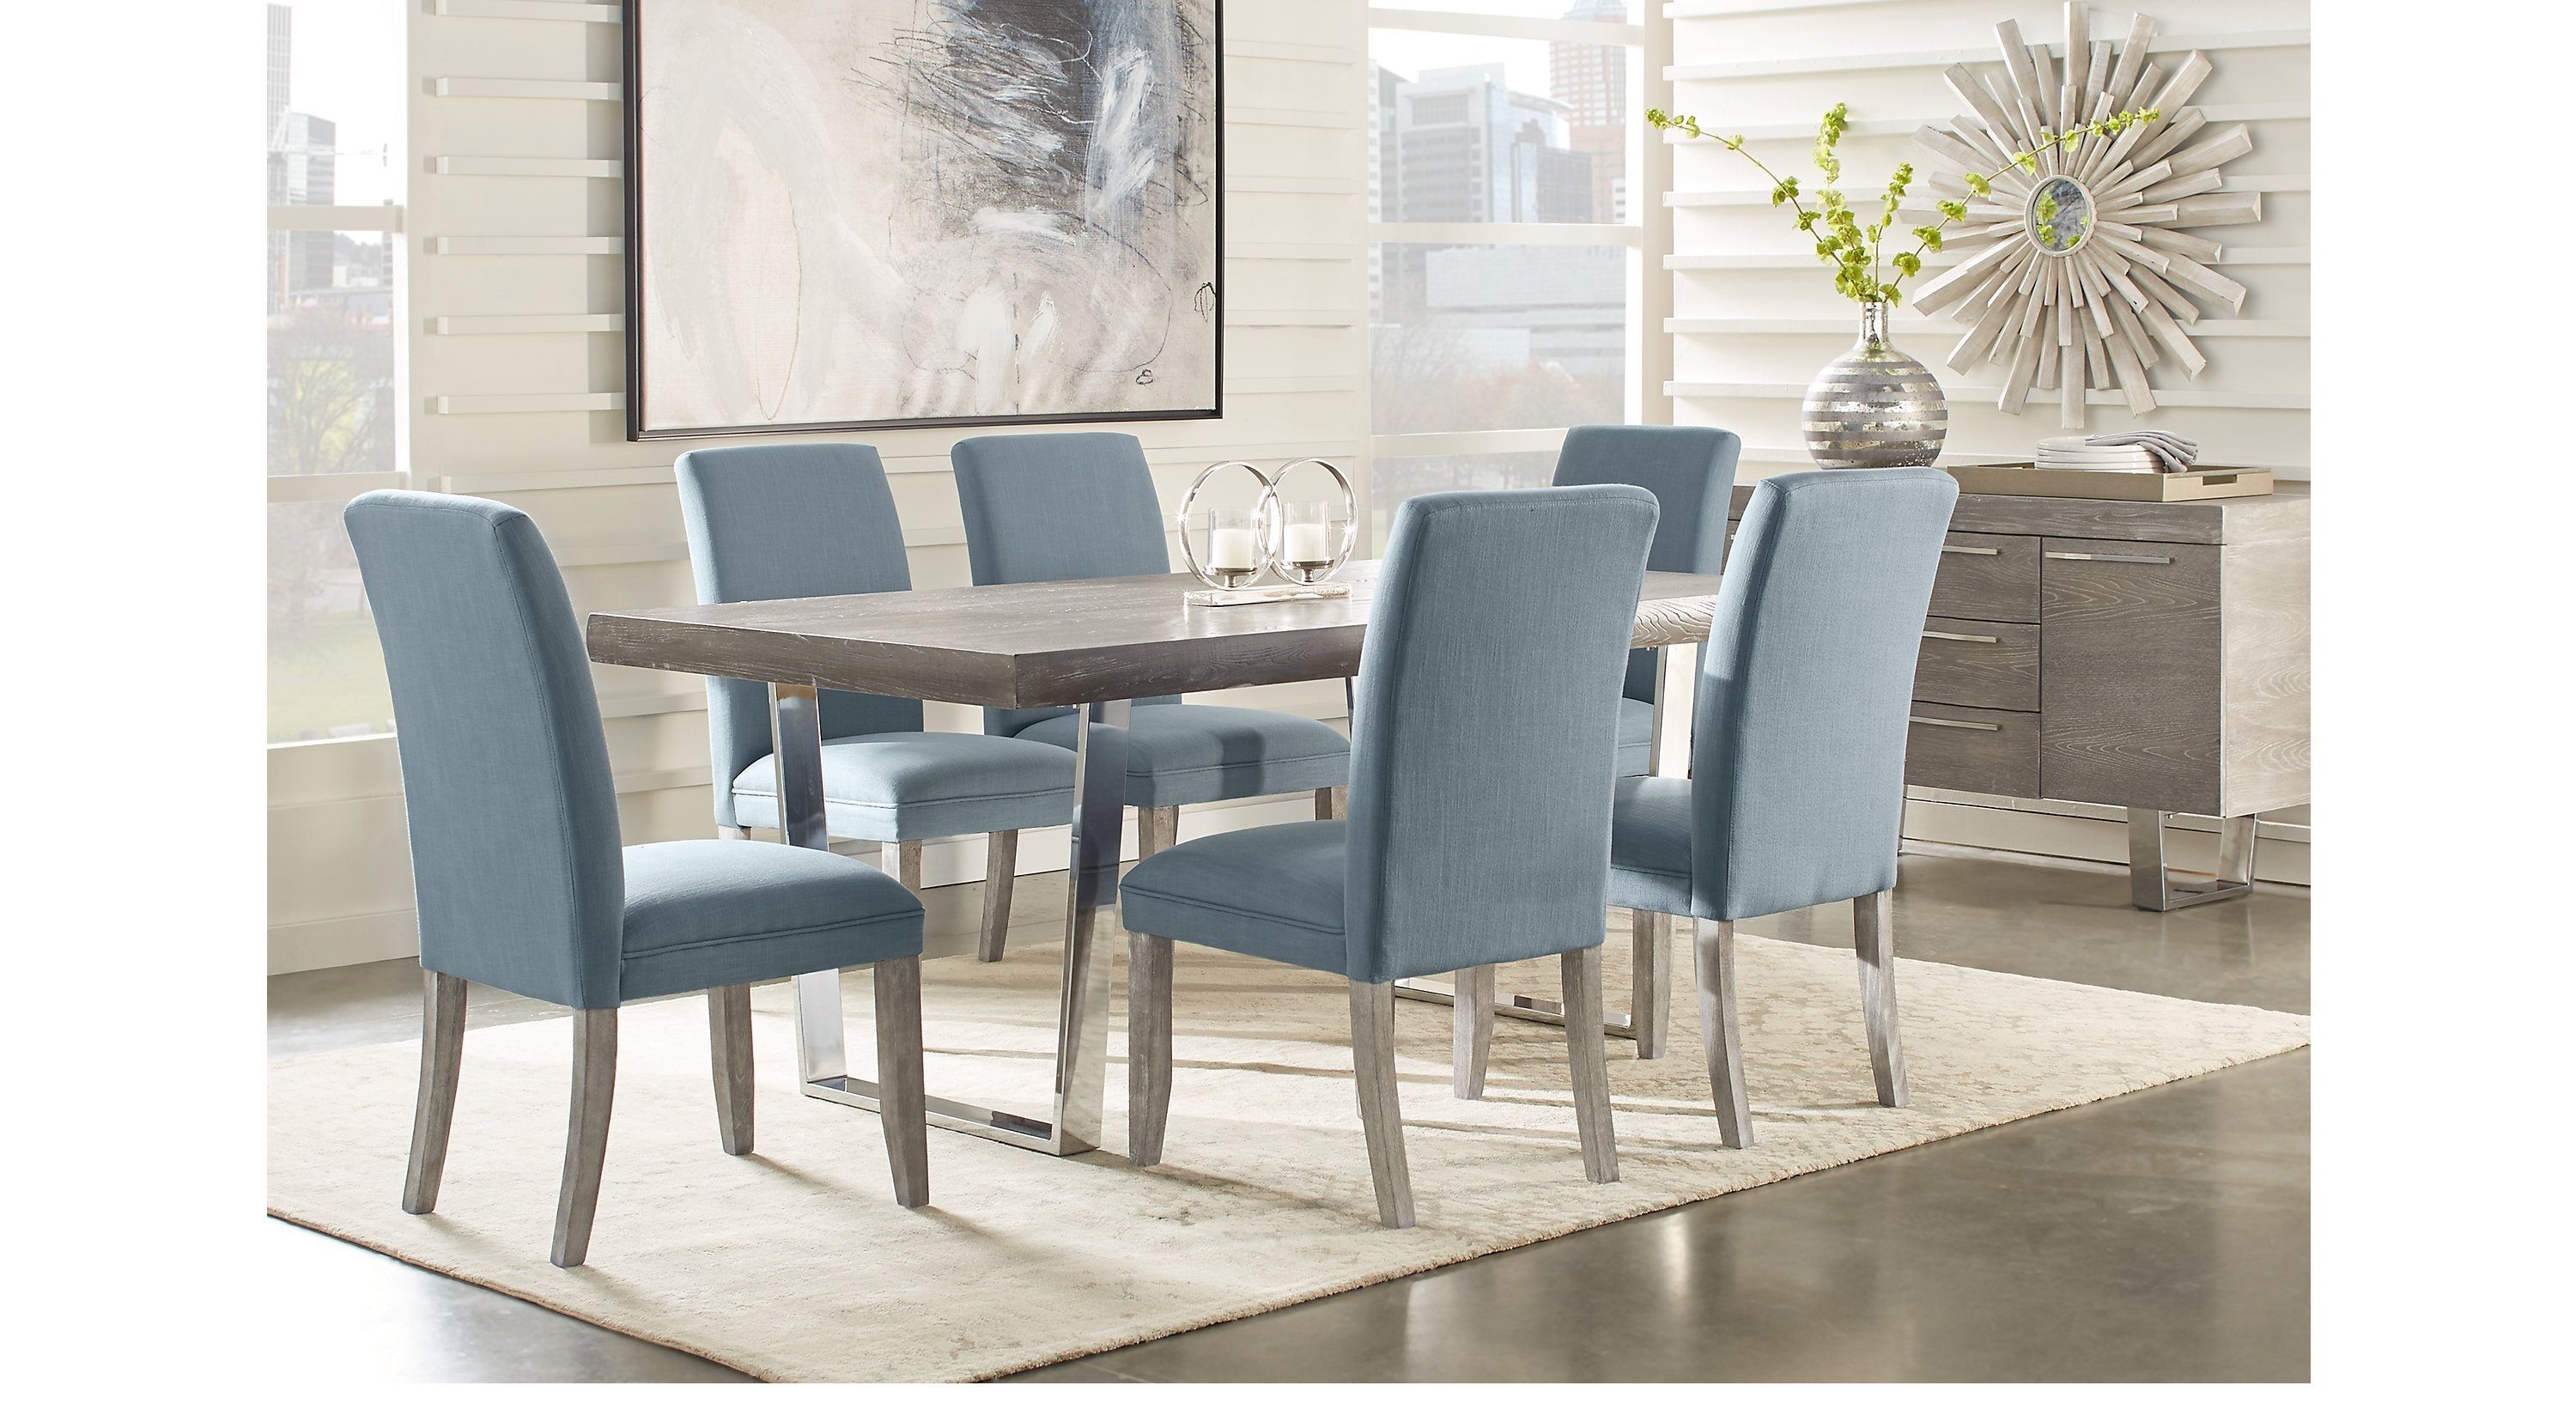 Cindy Crawford Home San Francisco Gray 5 Pc Dining Room | Bmw With Regard To 2018 Crawford 7 Piece Rectangle Dining Sets (View 11 of 20)